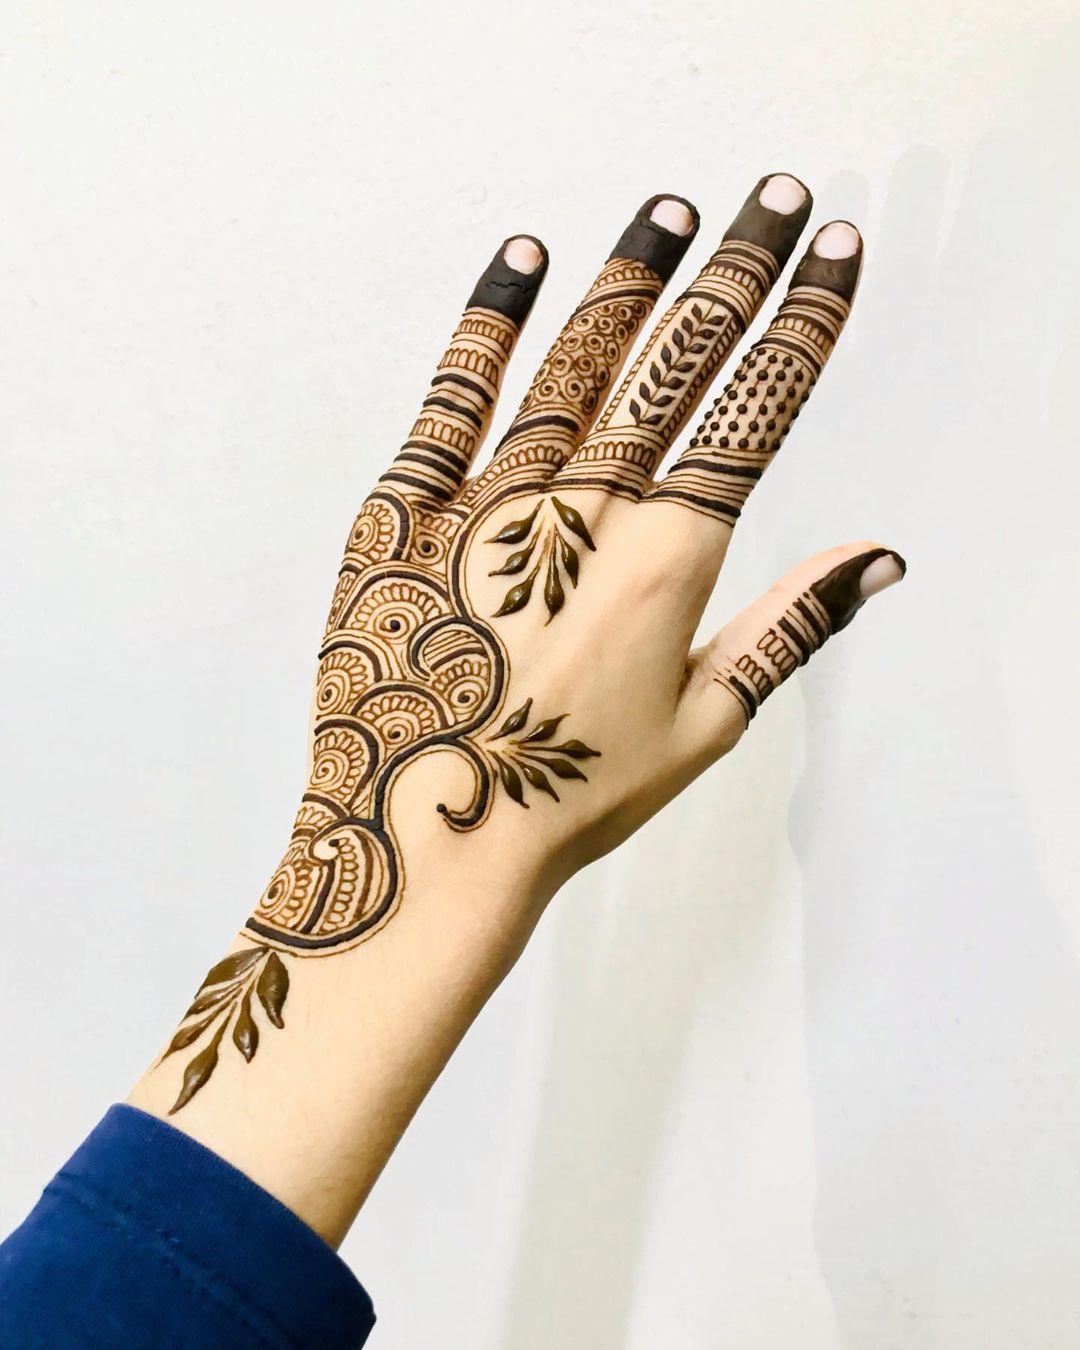 20+ Unique Finger Mehndi Designs That You'll Absolutely Love | WedMeGood